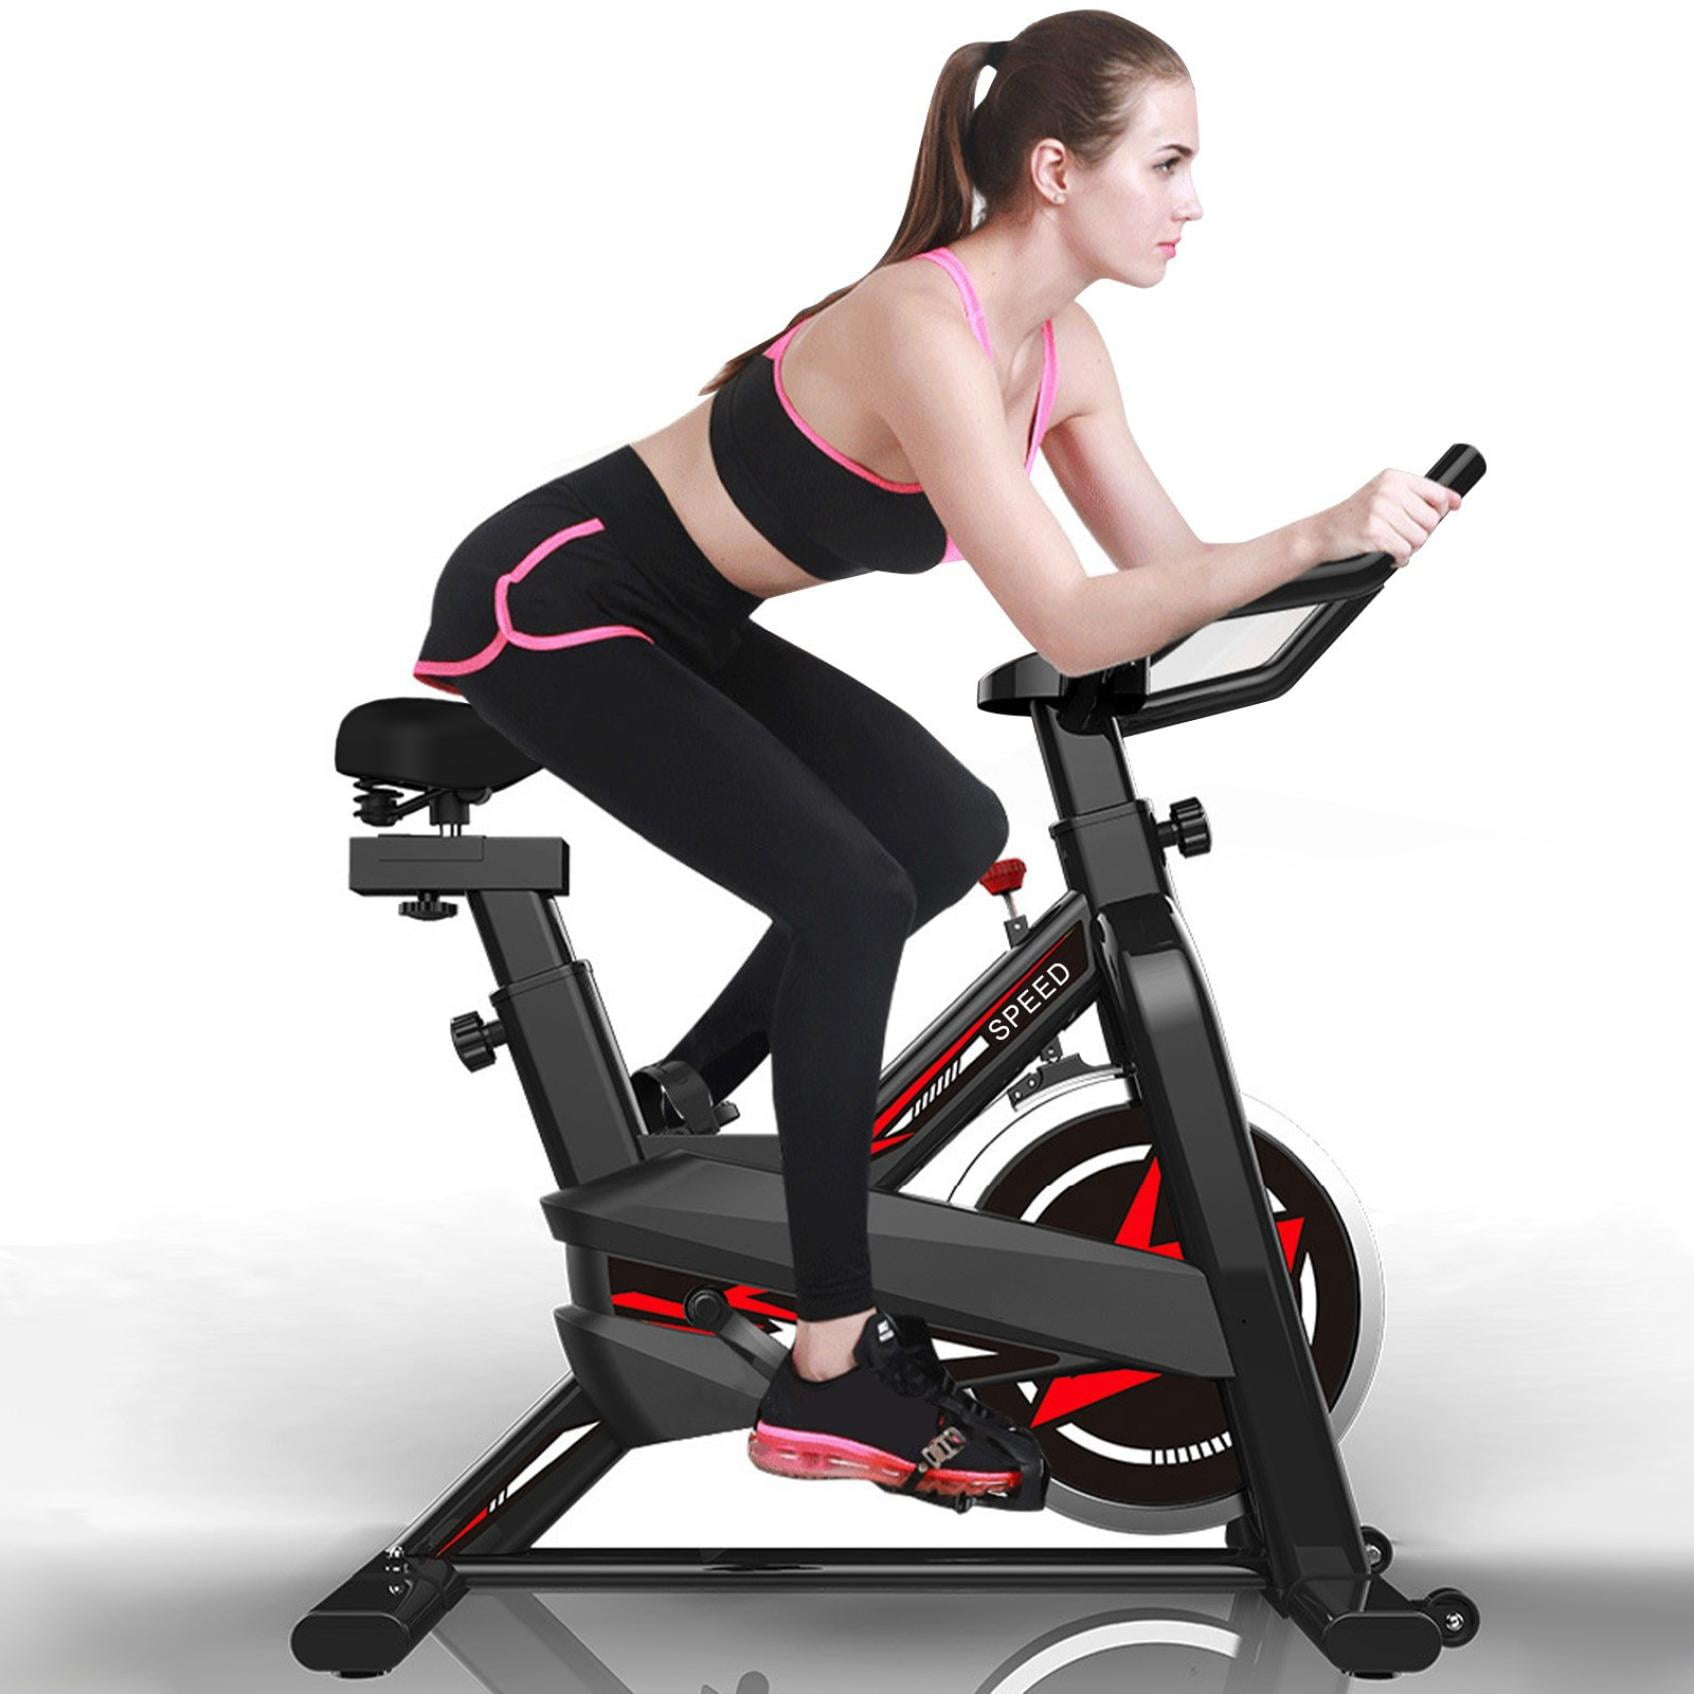 Details about   Exercise Bicycle Cycling Fitness Stationary Bike Cardio Home Indoor 